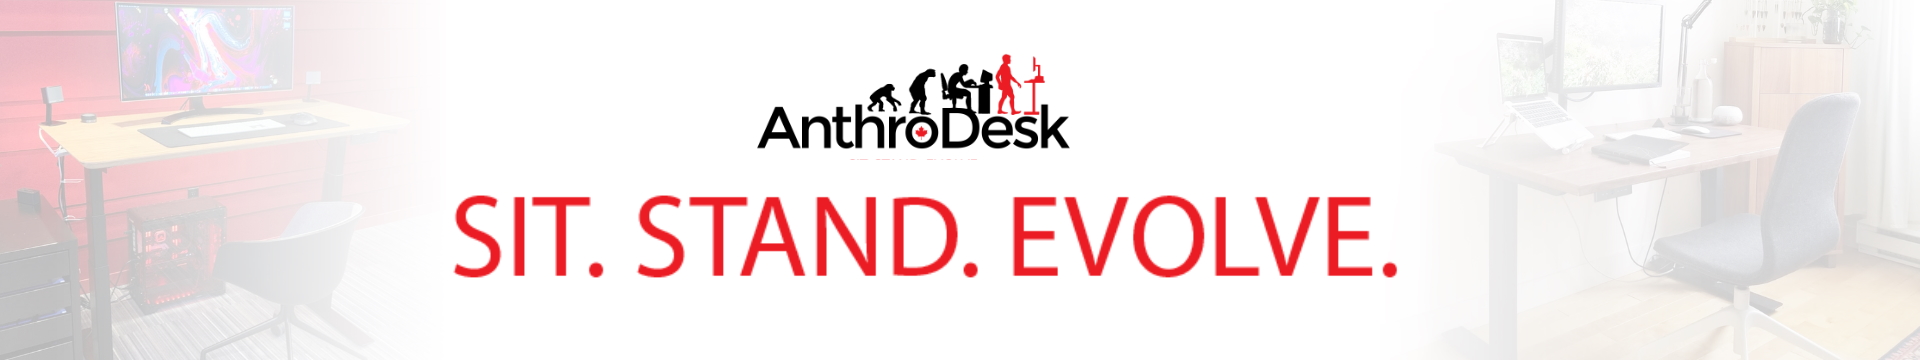 Welcome to AnthroDesk